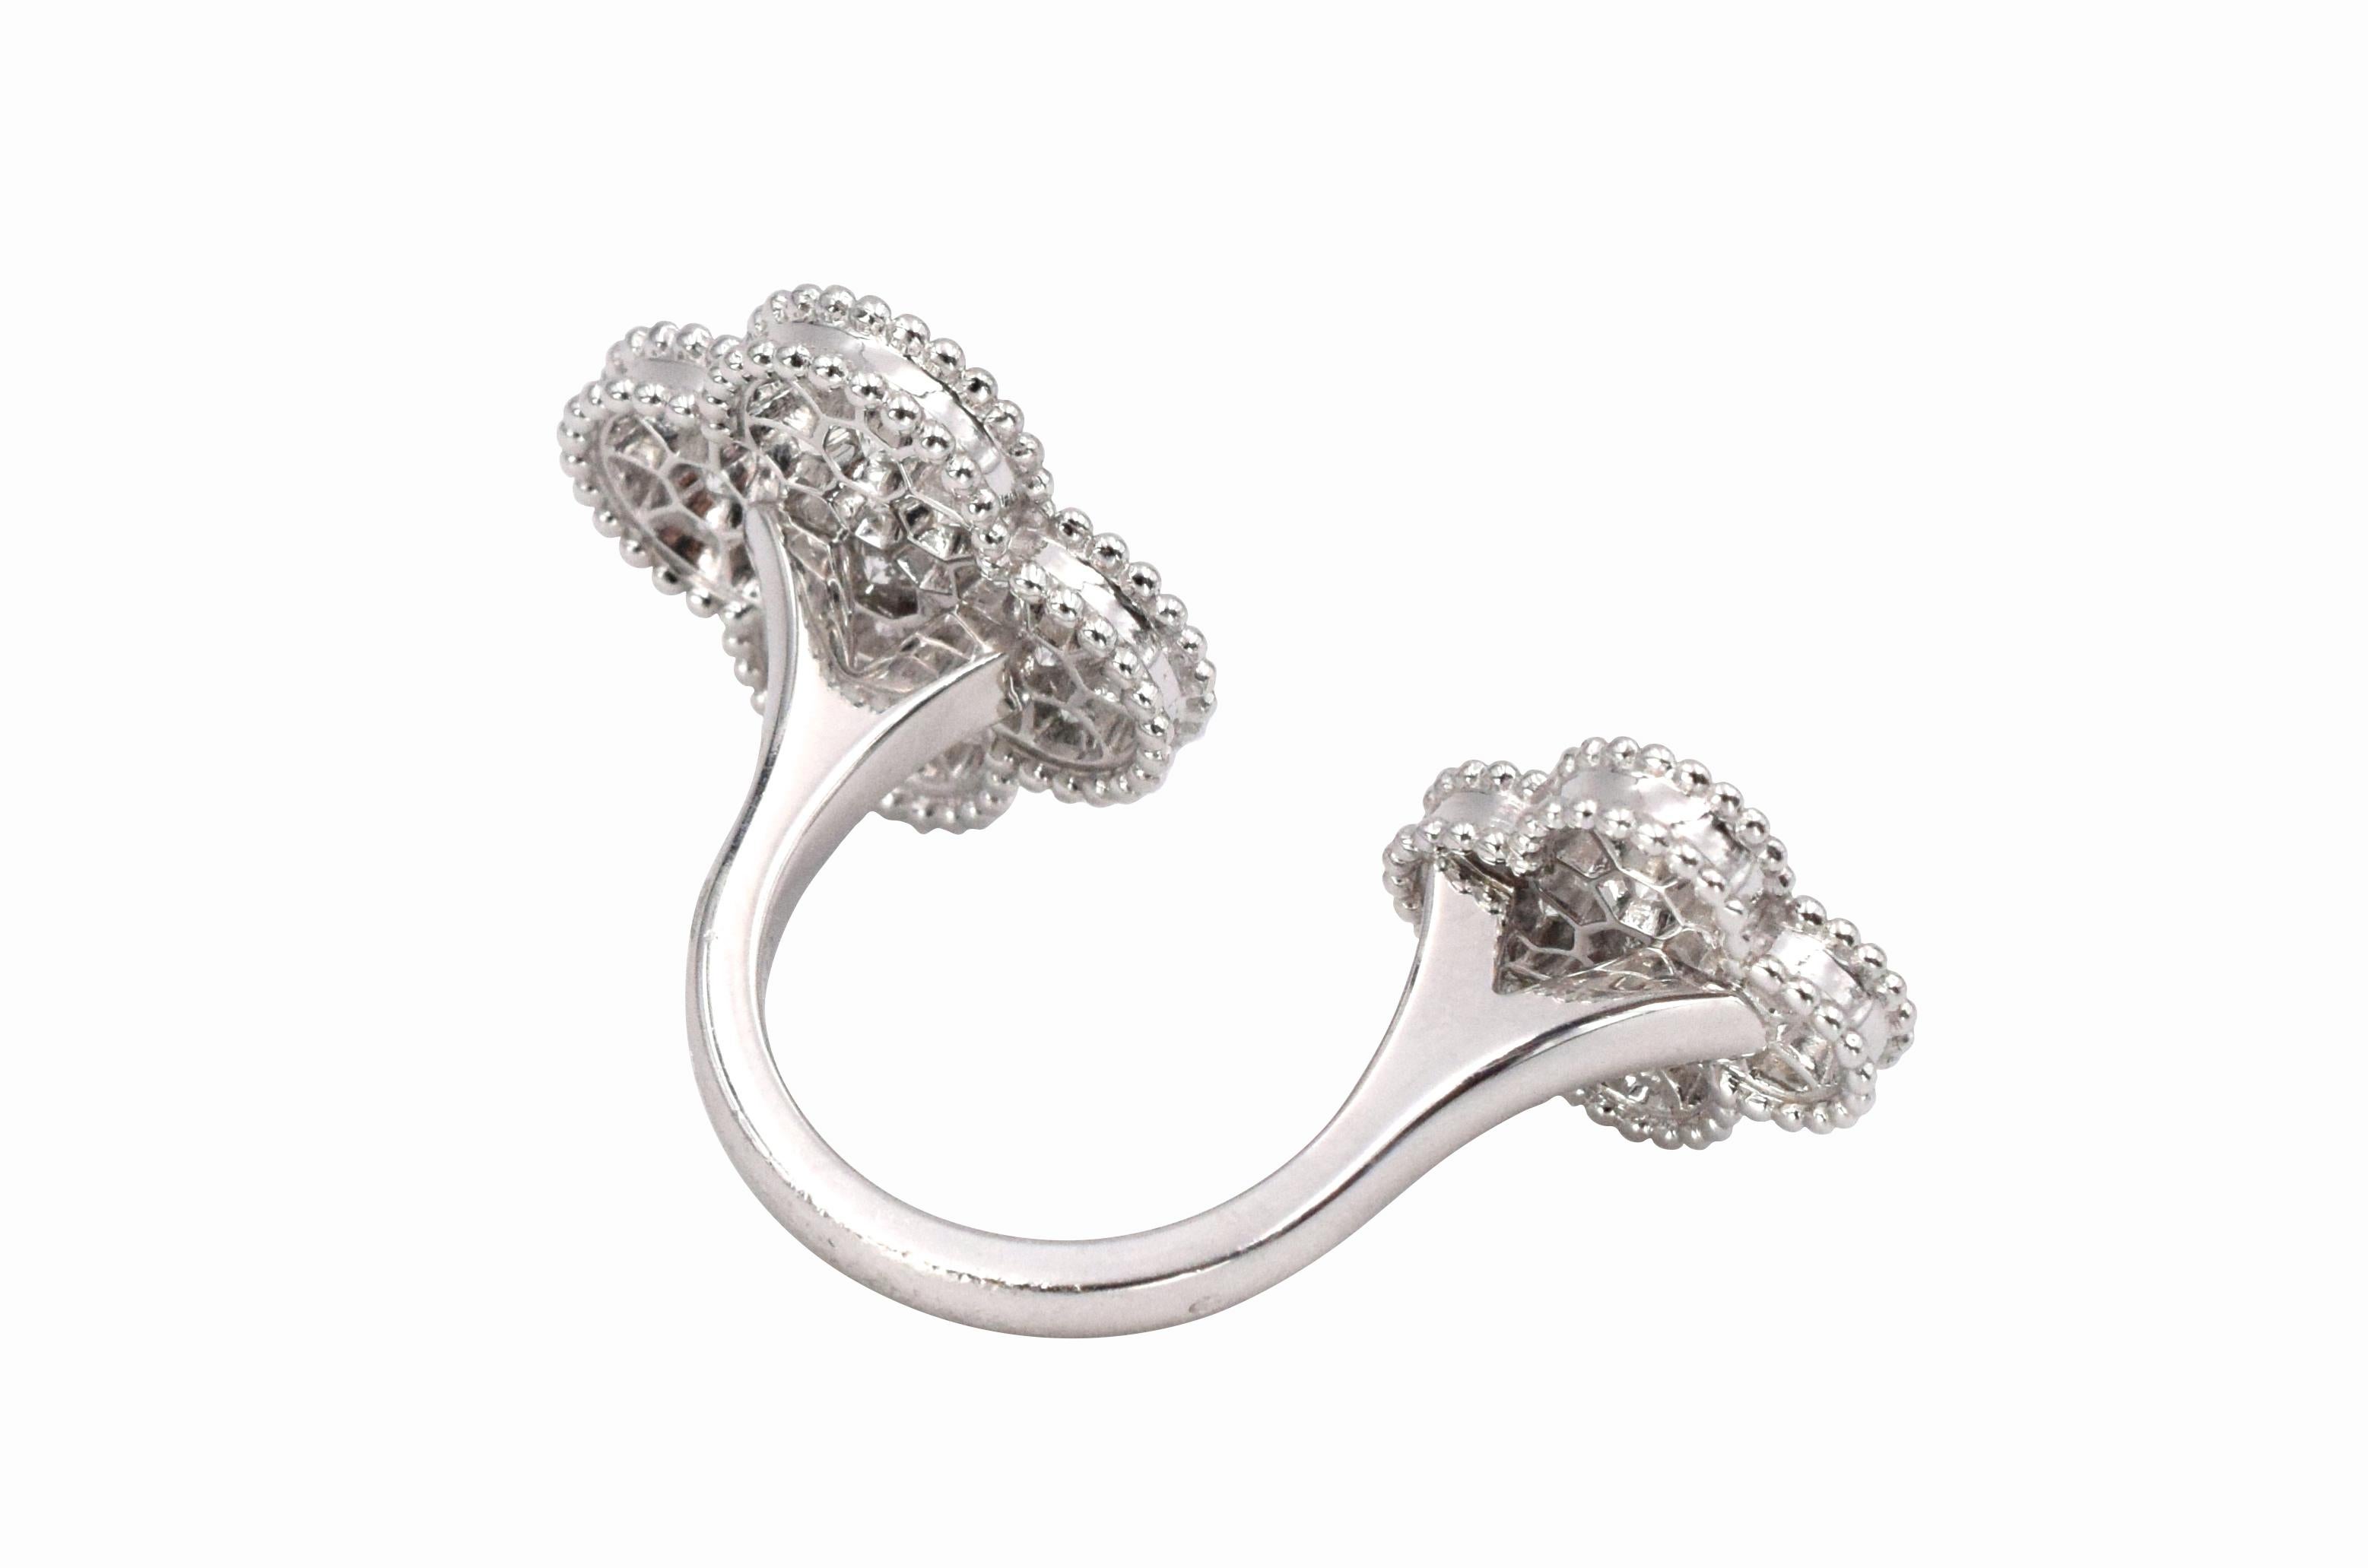 Van Cleef & Arpels Magic Alhambra Between Fingers Ring. This ring has approximately 1.6ct of round brilliant cut diamonds all set in 18k white gold. Signed VCA, Au750, JE123212. Finger size 52.